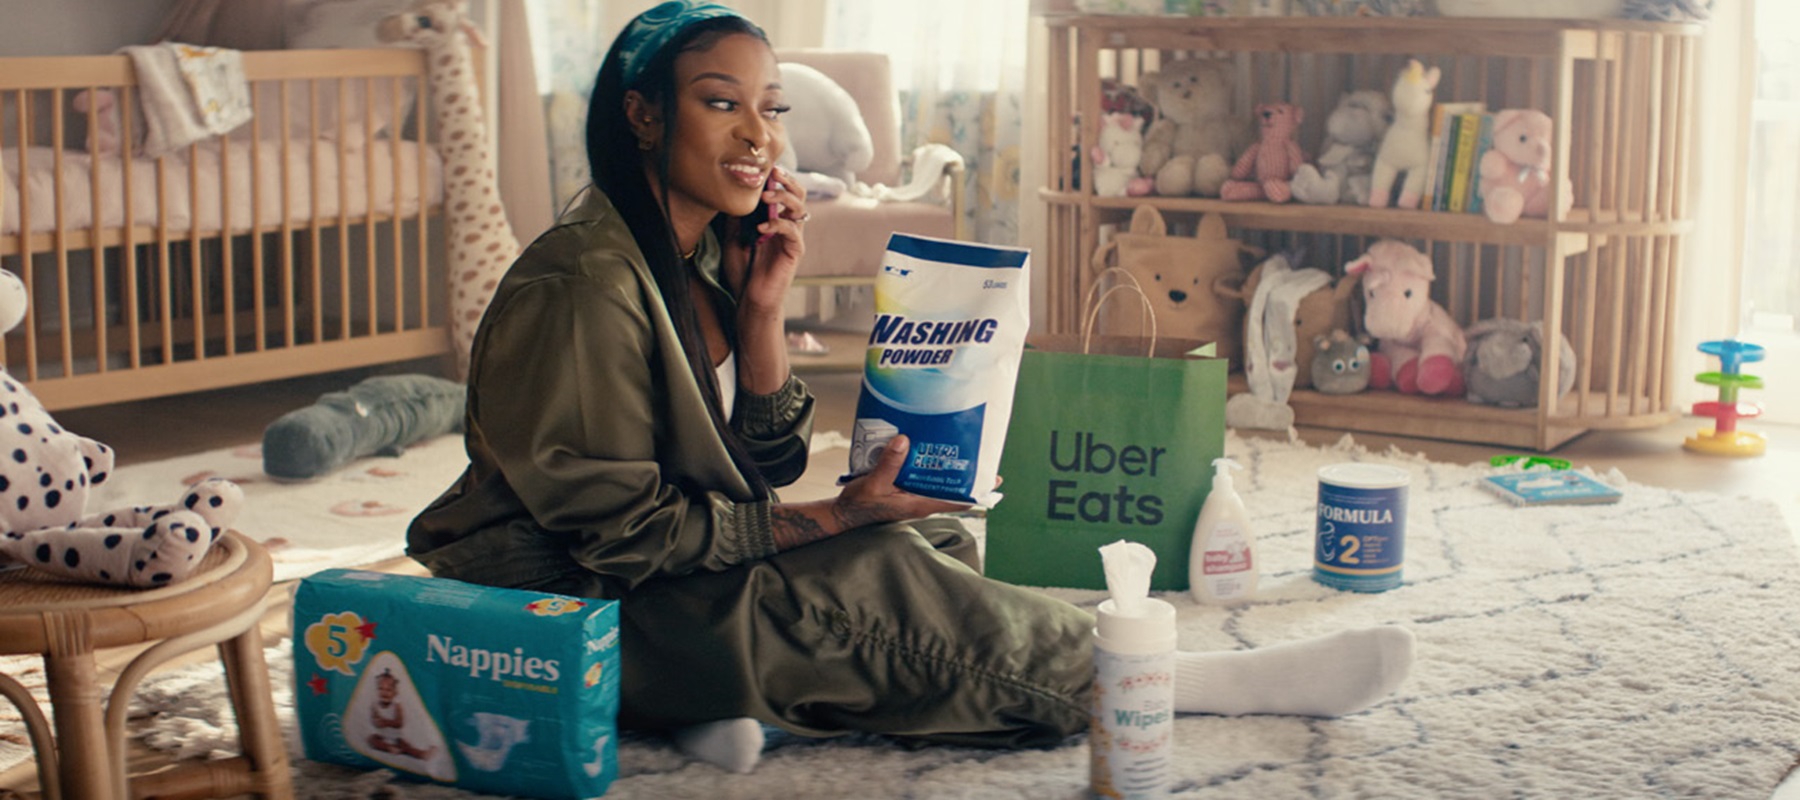 Joe Public Cape Town puts ‘eats’ into everything in latest Uber Eats TVC